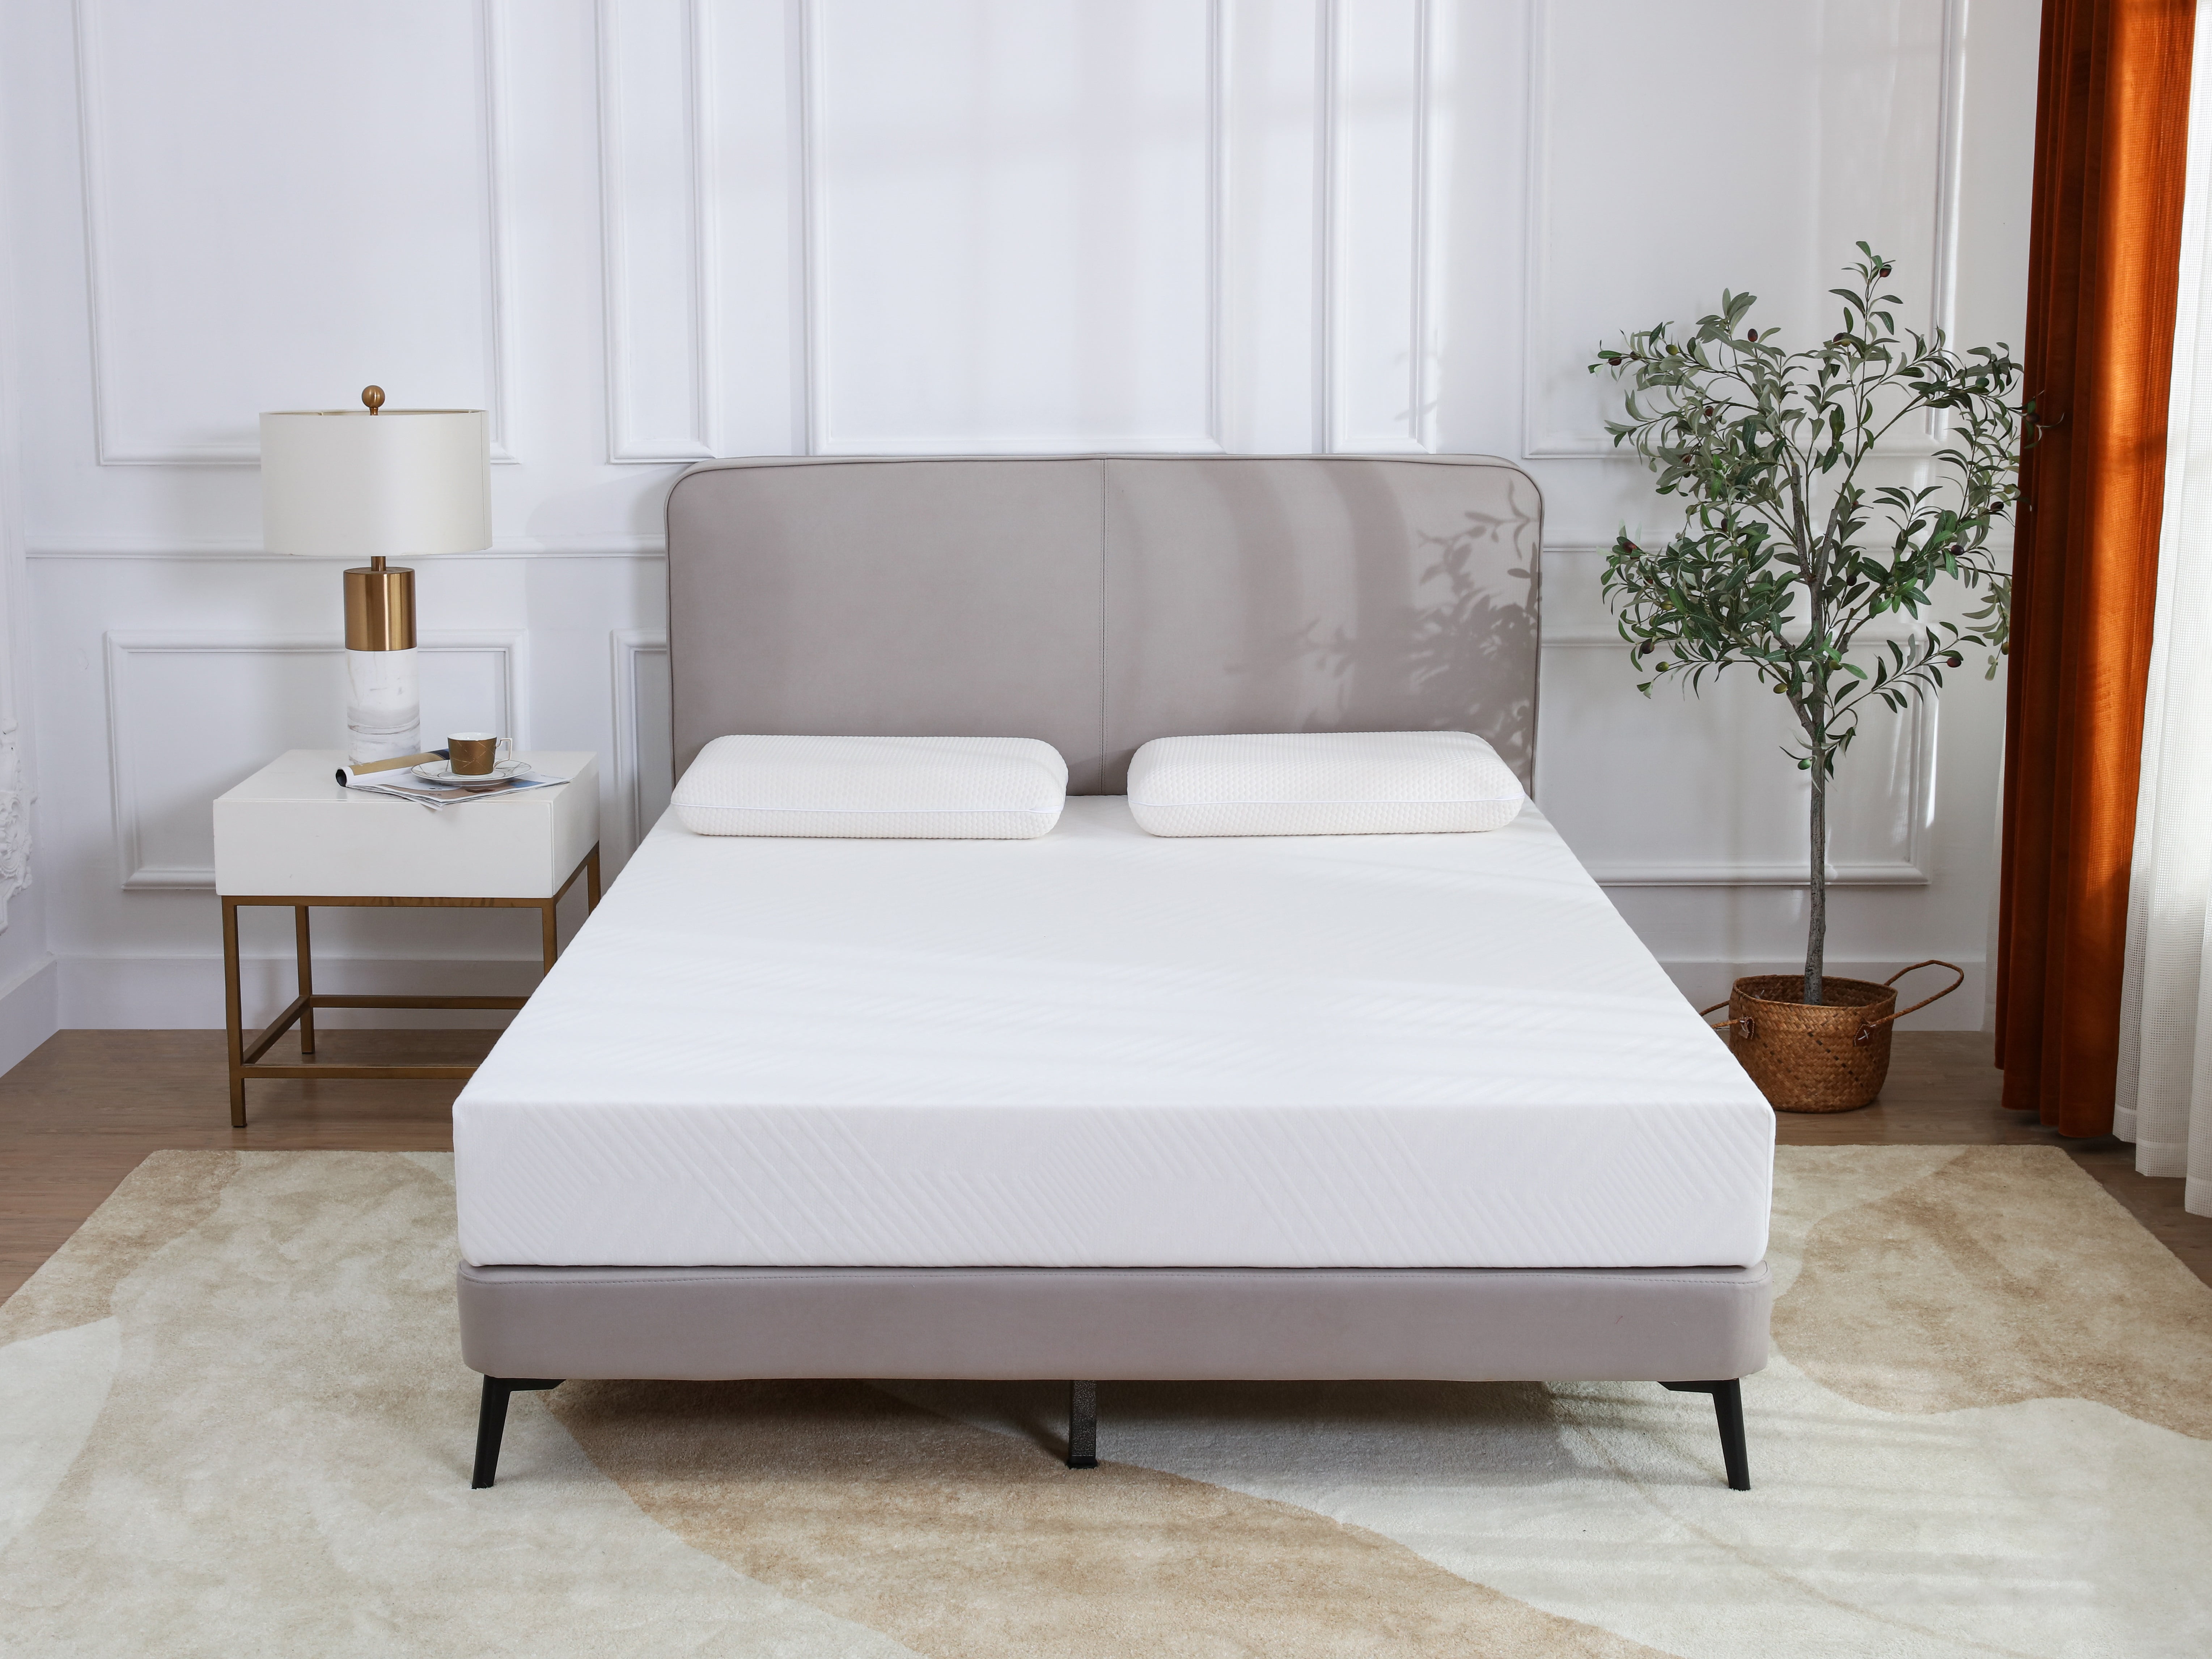 Details about   8 Inch Twin Size Gel Memory Foam Mattress With CertiPUR-US Bed Mattress In Box 